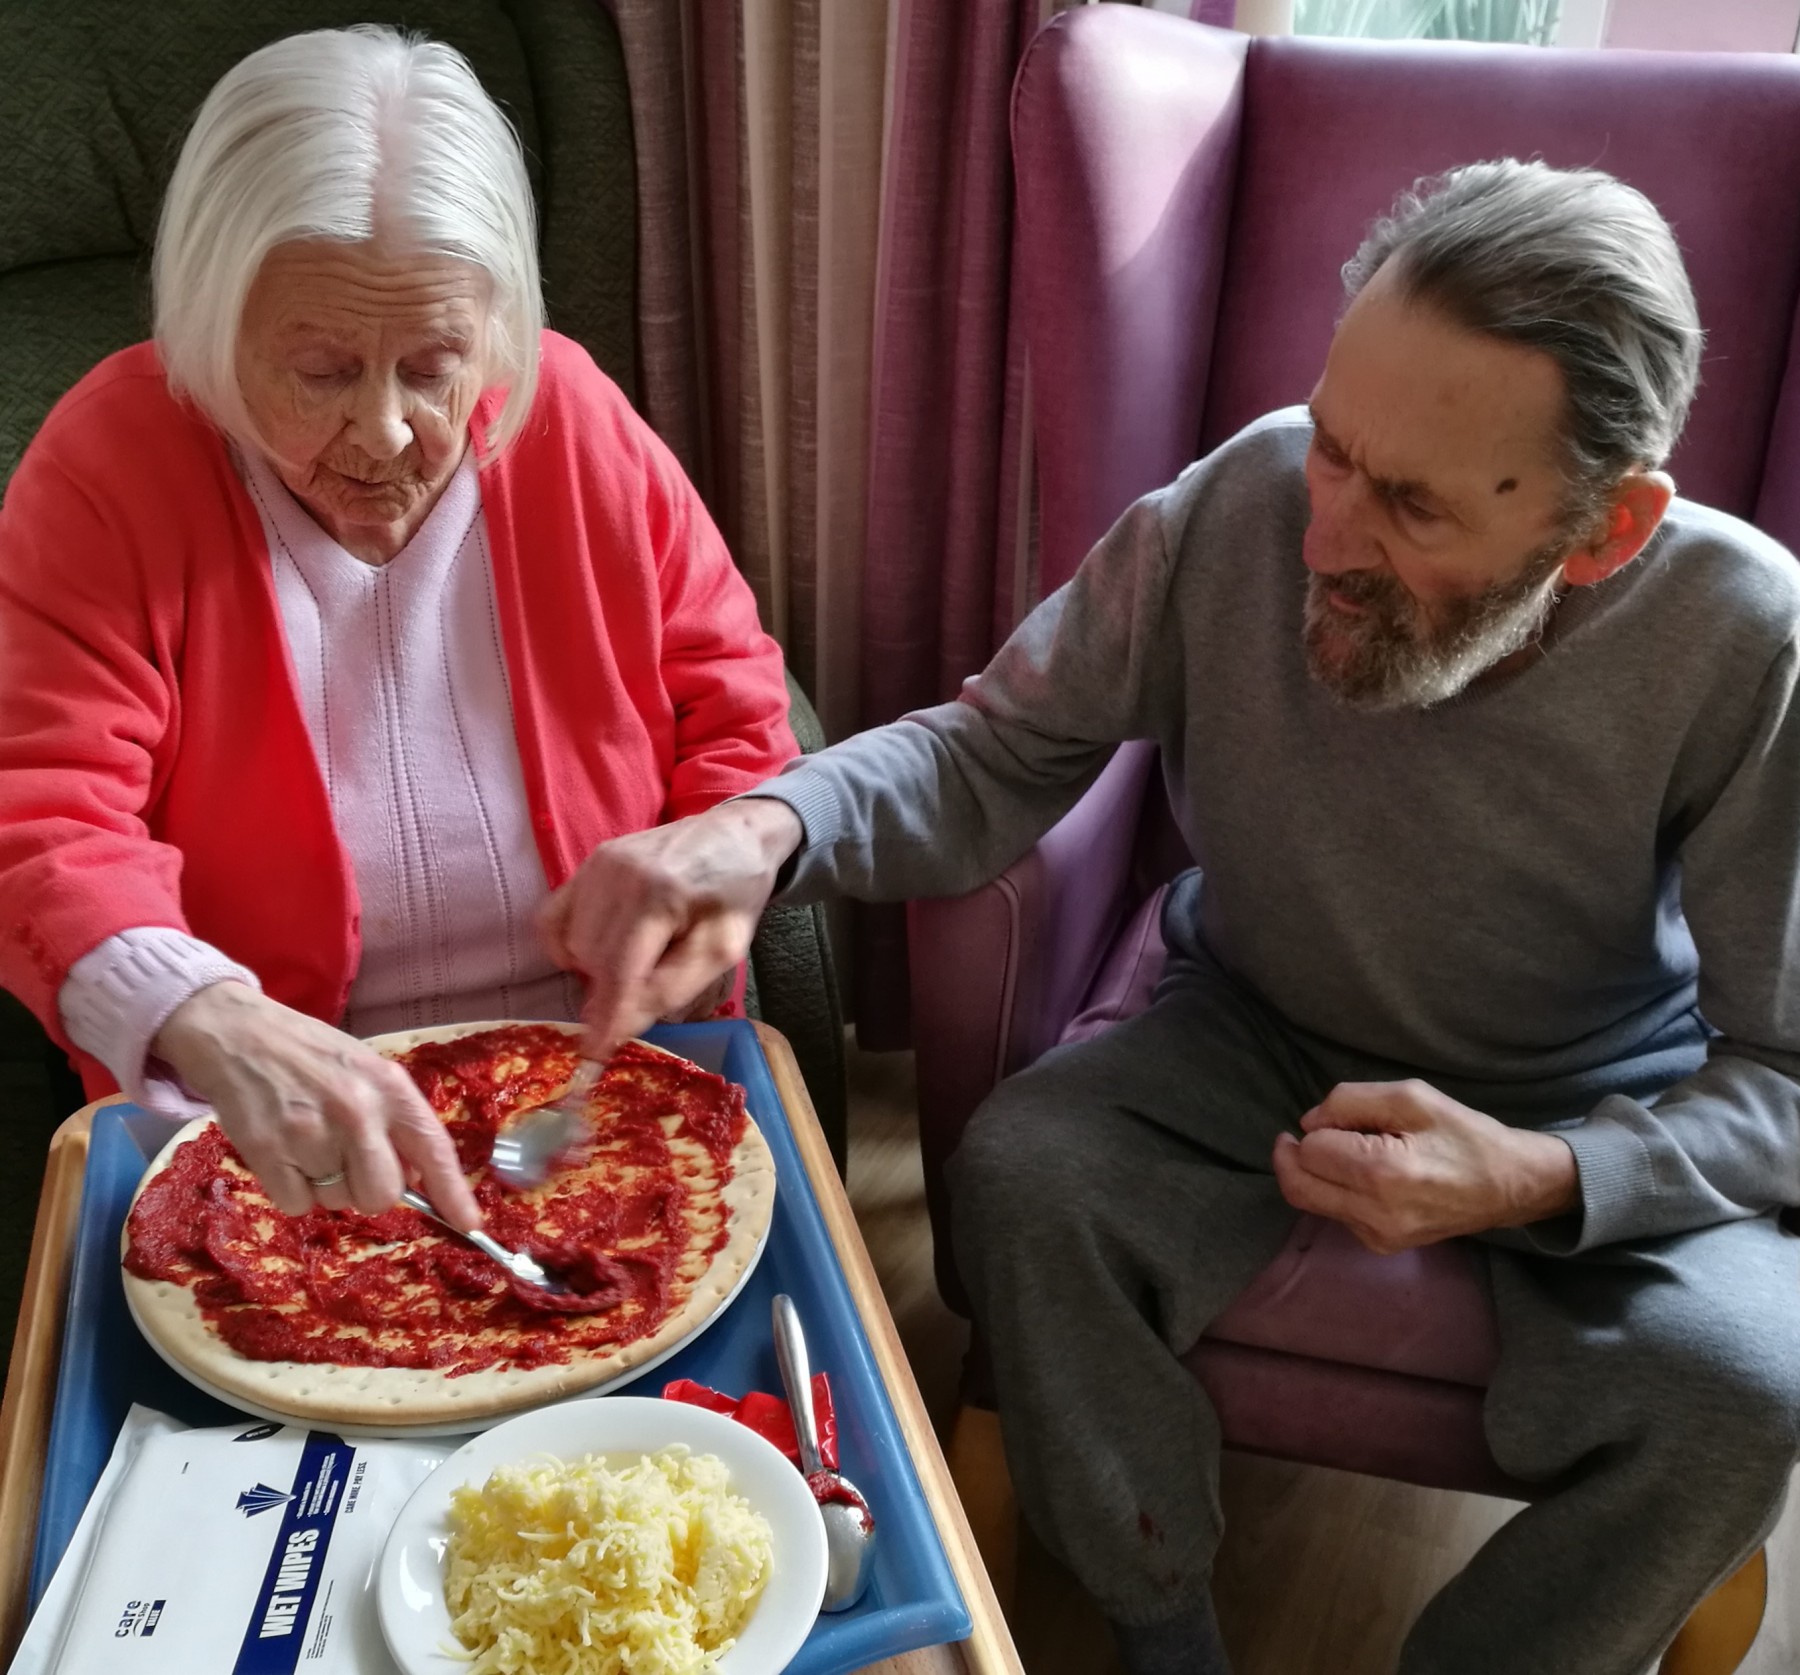 National Pizza Day at Sherborne House